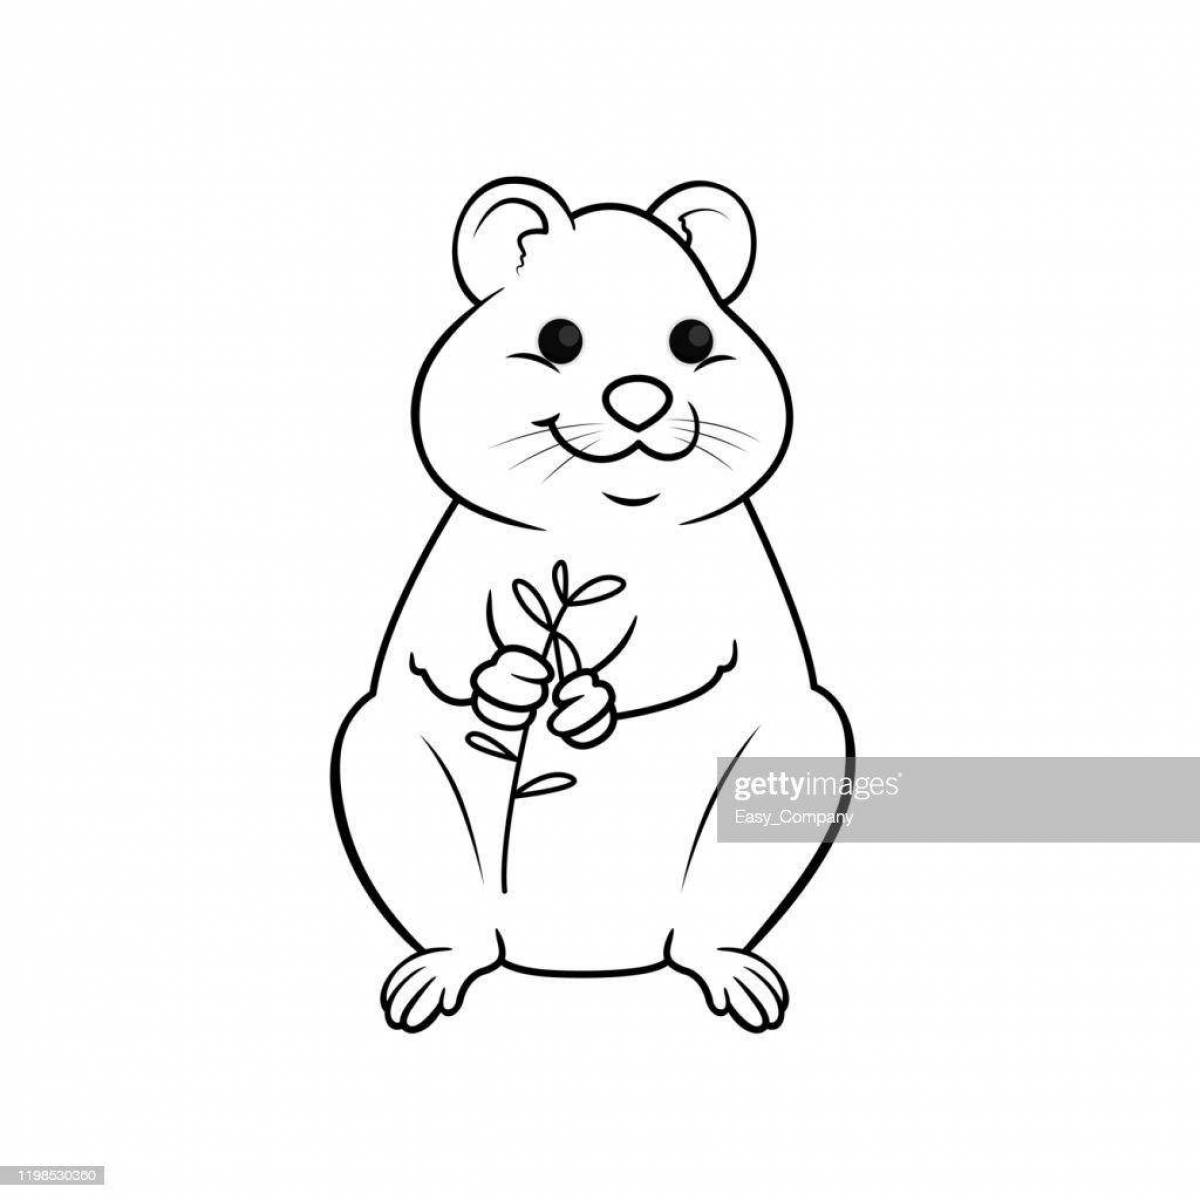 Glowing quokka coloring page